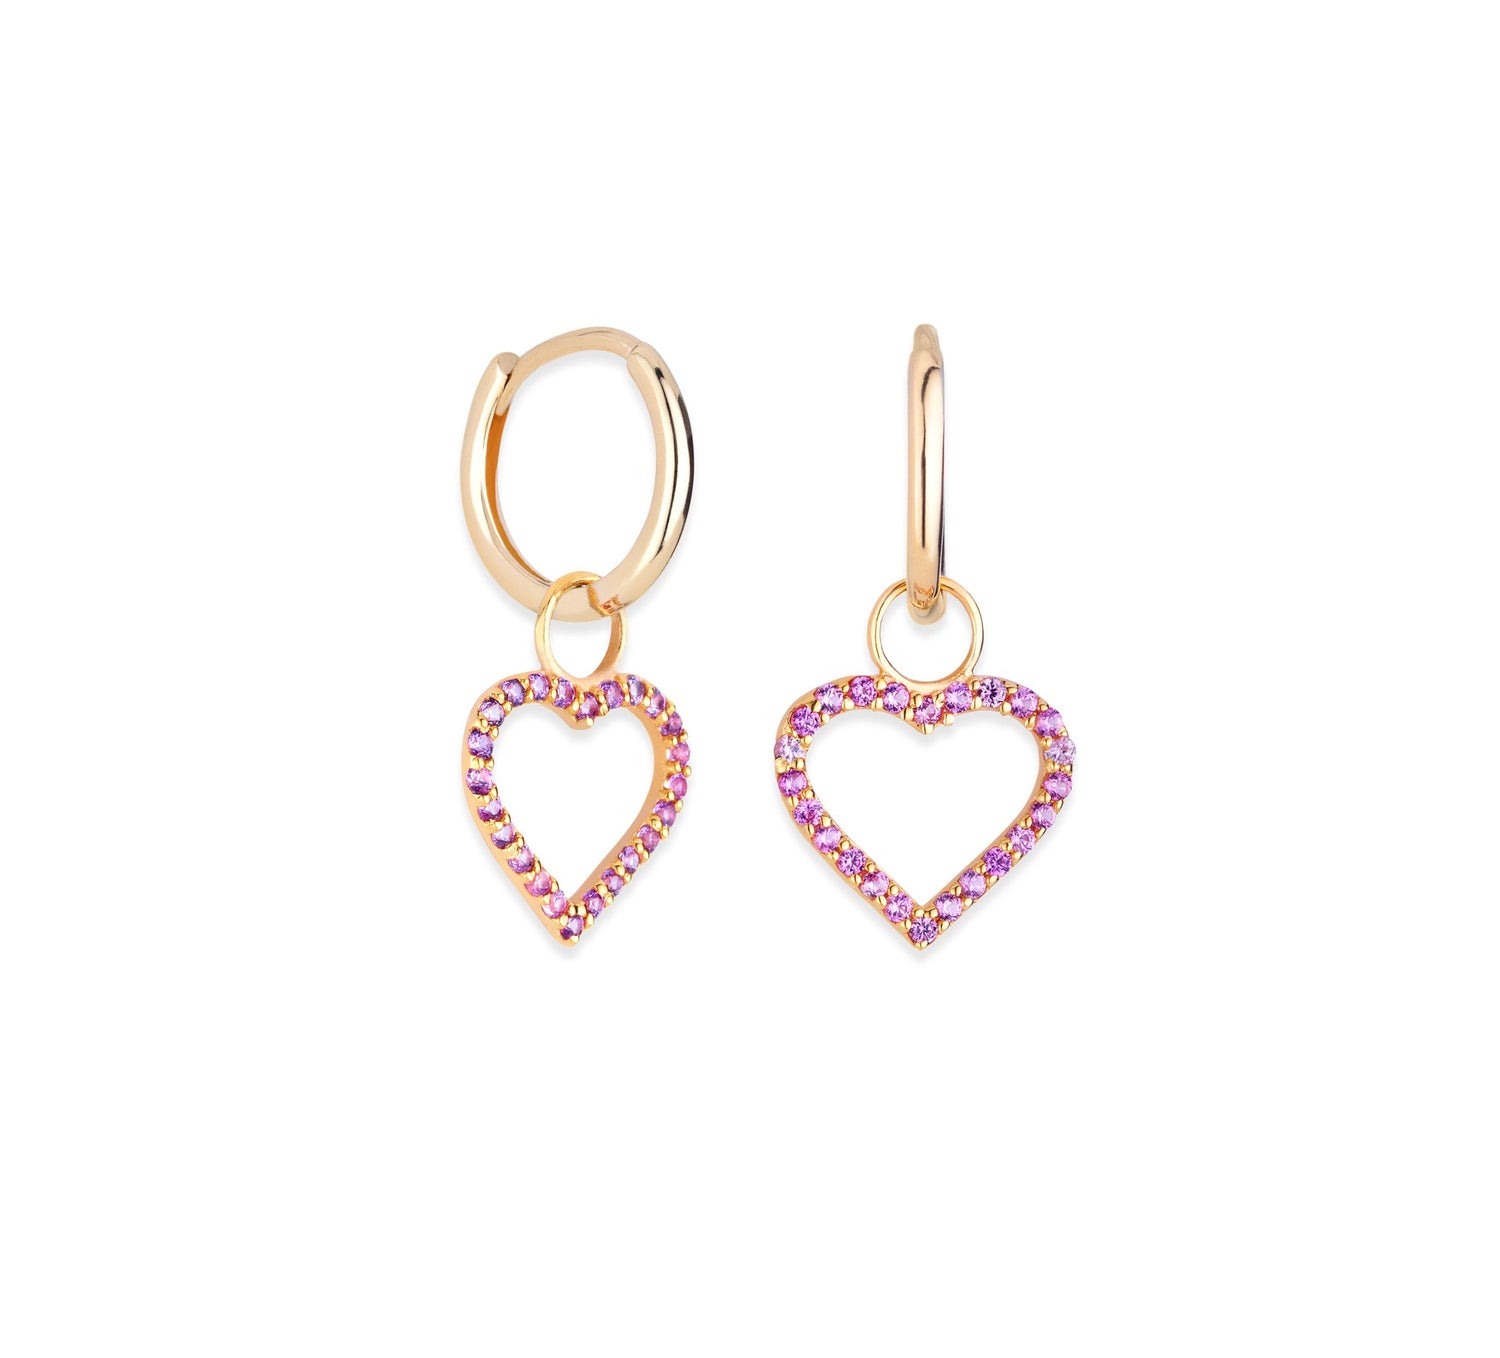 The Yellow and Pink Sapphire Sweet-Hearts